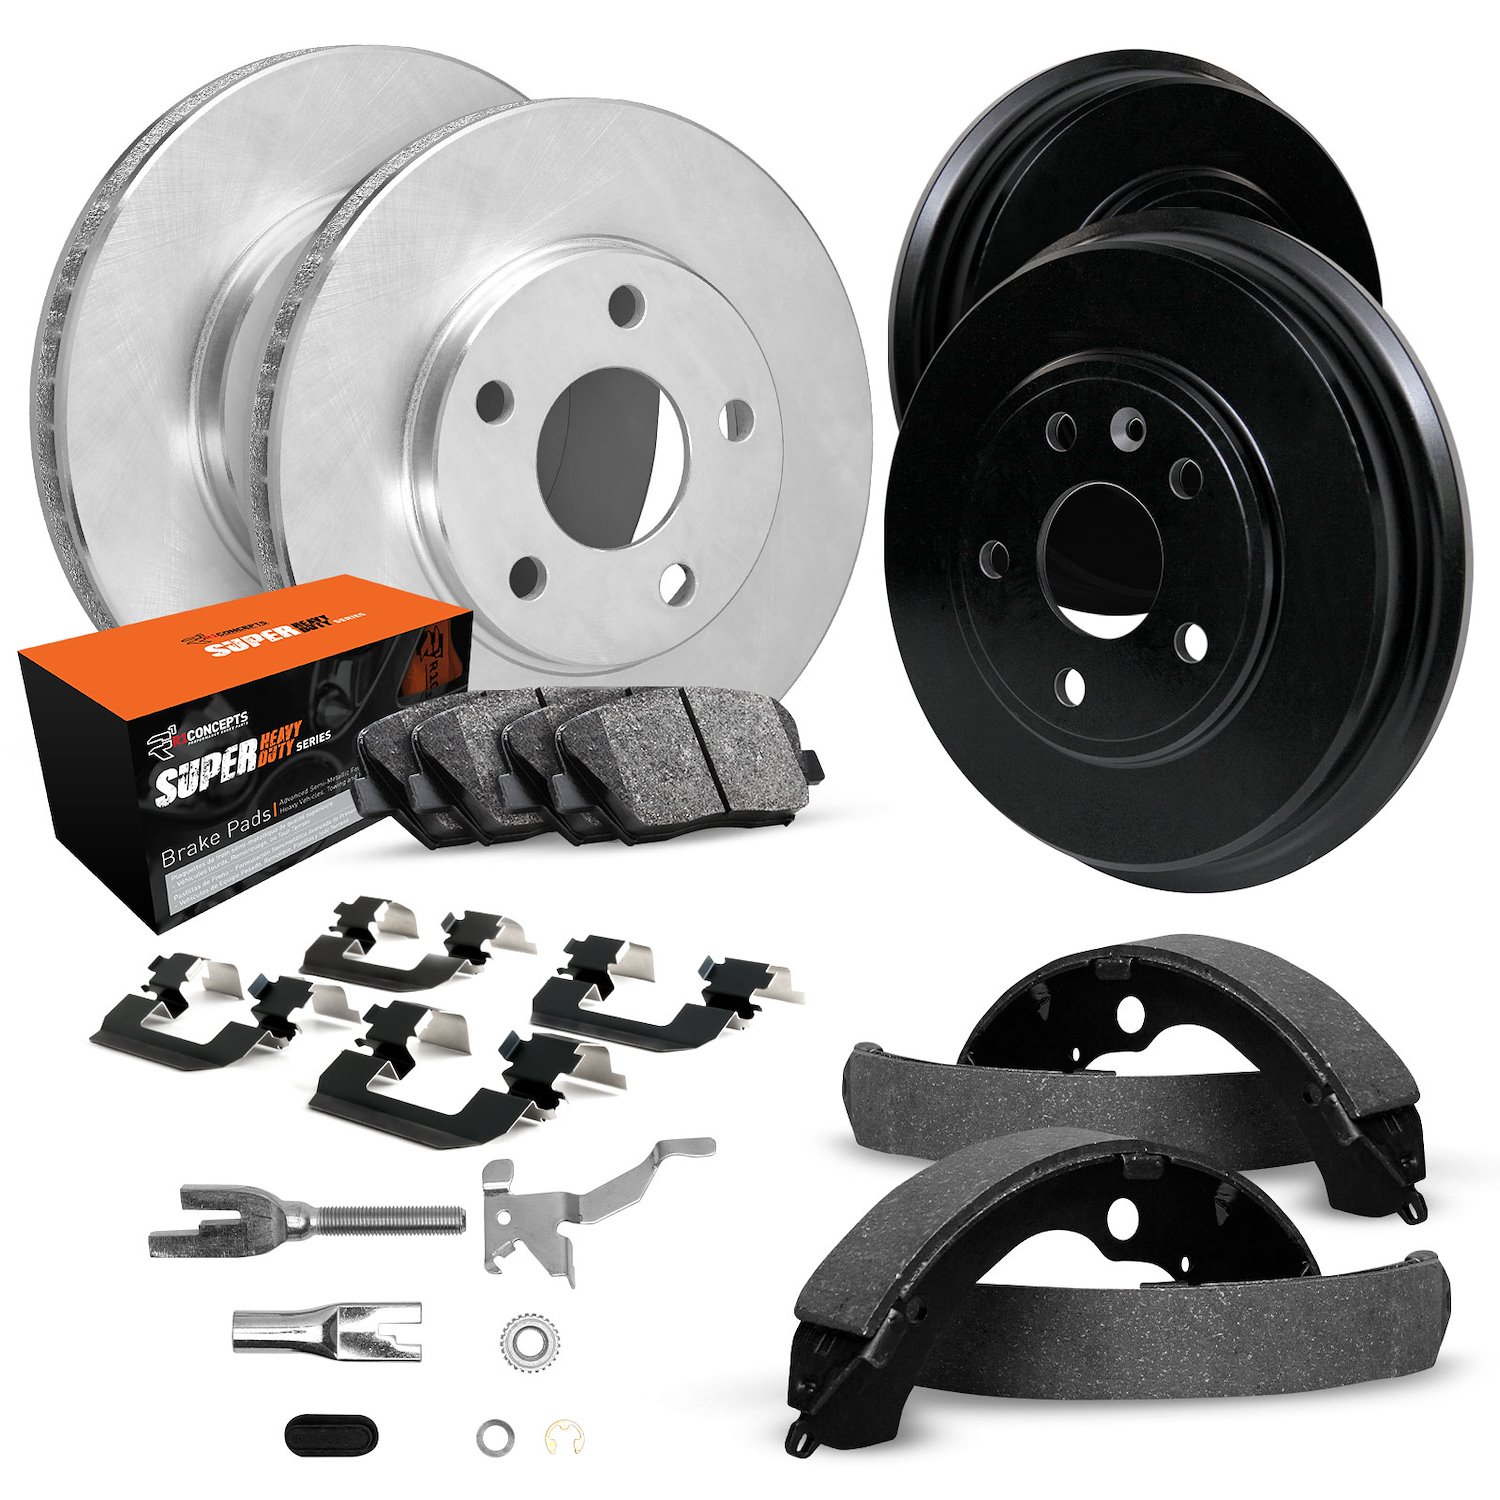 E-Line Blank Brake Rotor & Drum Set w/Super-Duty Pads, Shoes, Hardware, & Adjusters, 1983-1994 Ford/Lincoln/Mercury/Mazda